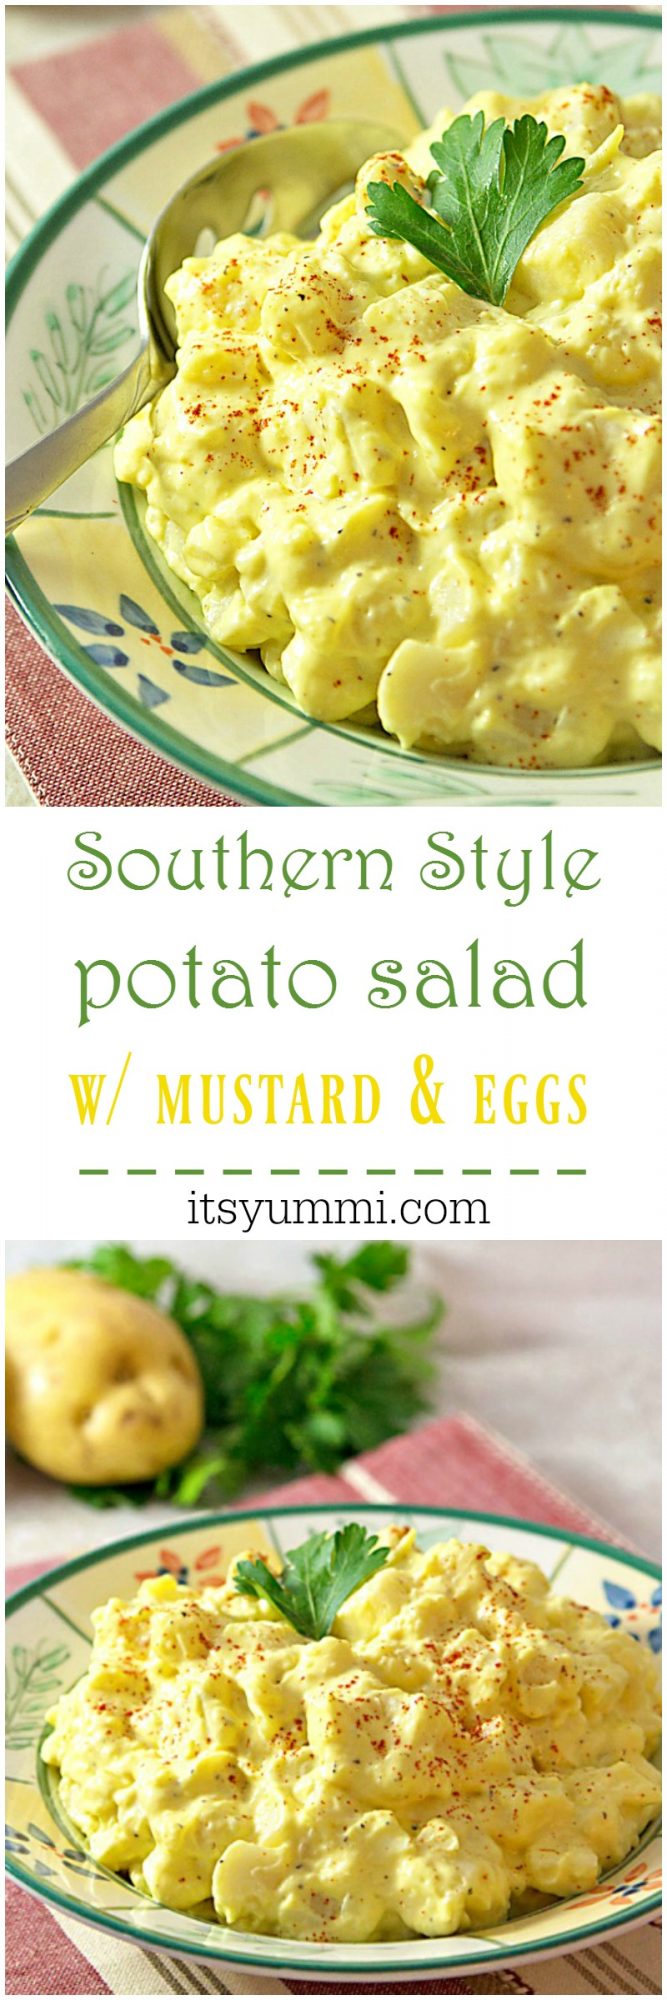 Southern Style Mustard Potato Salad with Egg - This is the best potato salad, ever! Recipe from @itsyummi